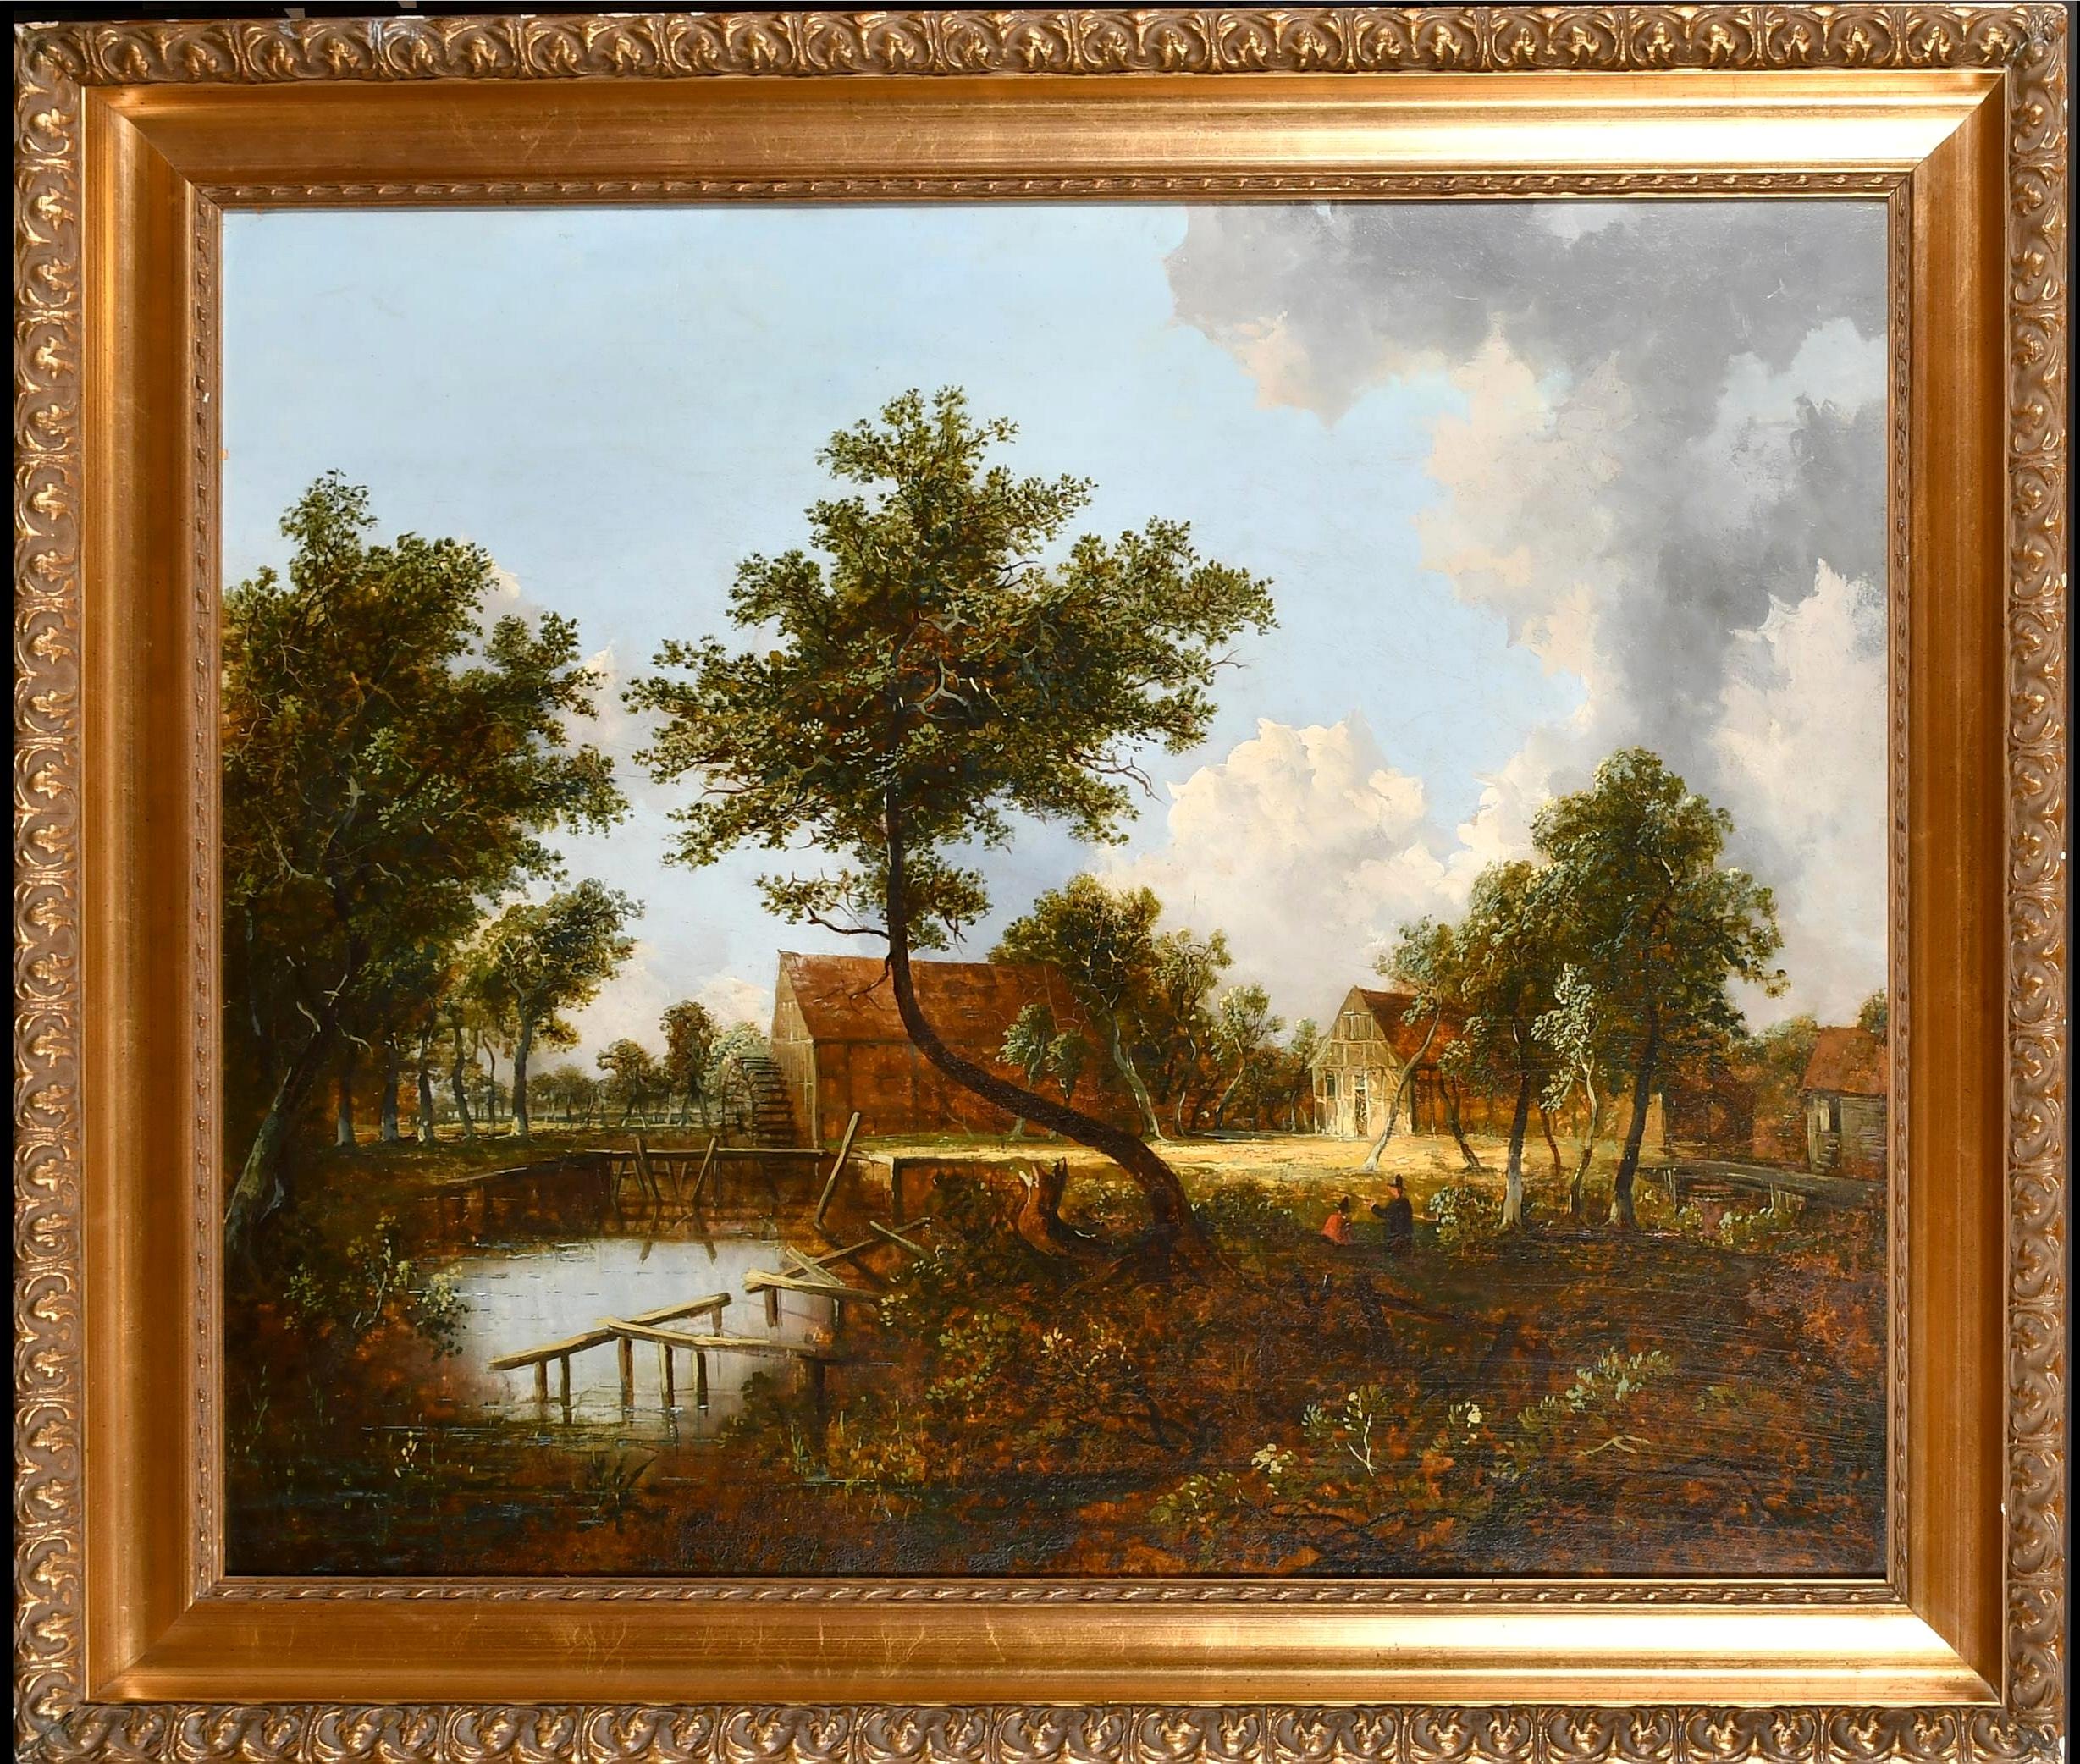 Follower of Meindert Hobbema Landscape Painting - Figures in a Dutch Landscape - Large Antique 19th Century Oil on Canvas Painting